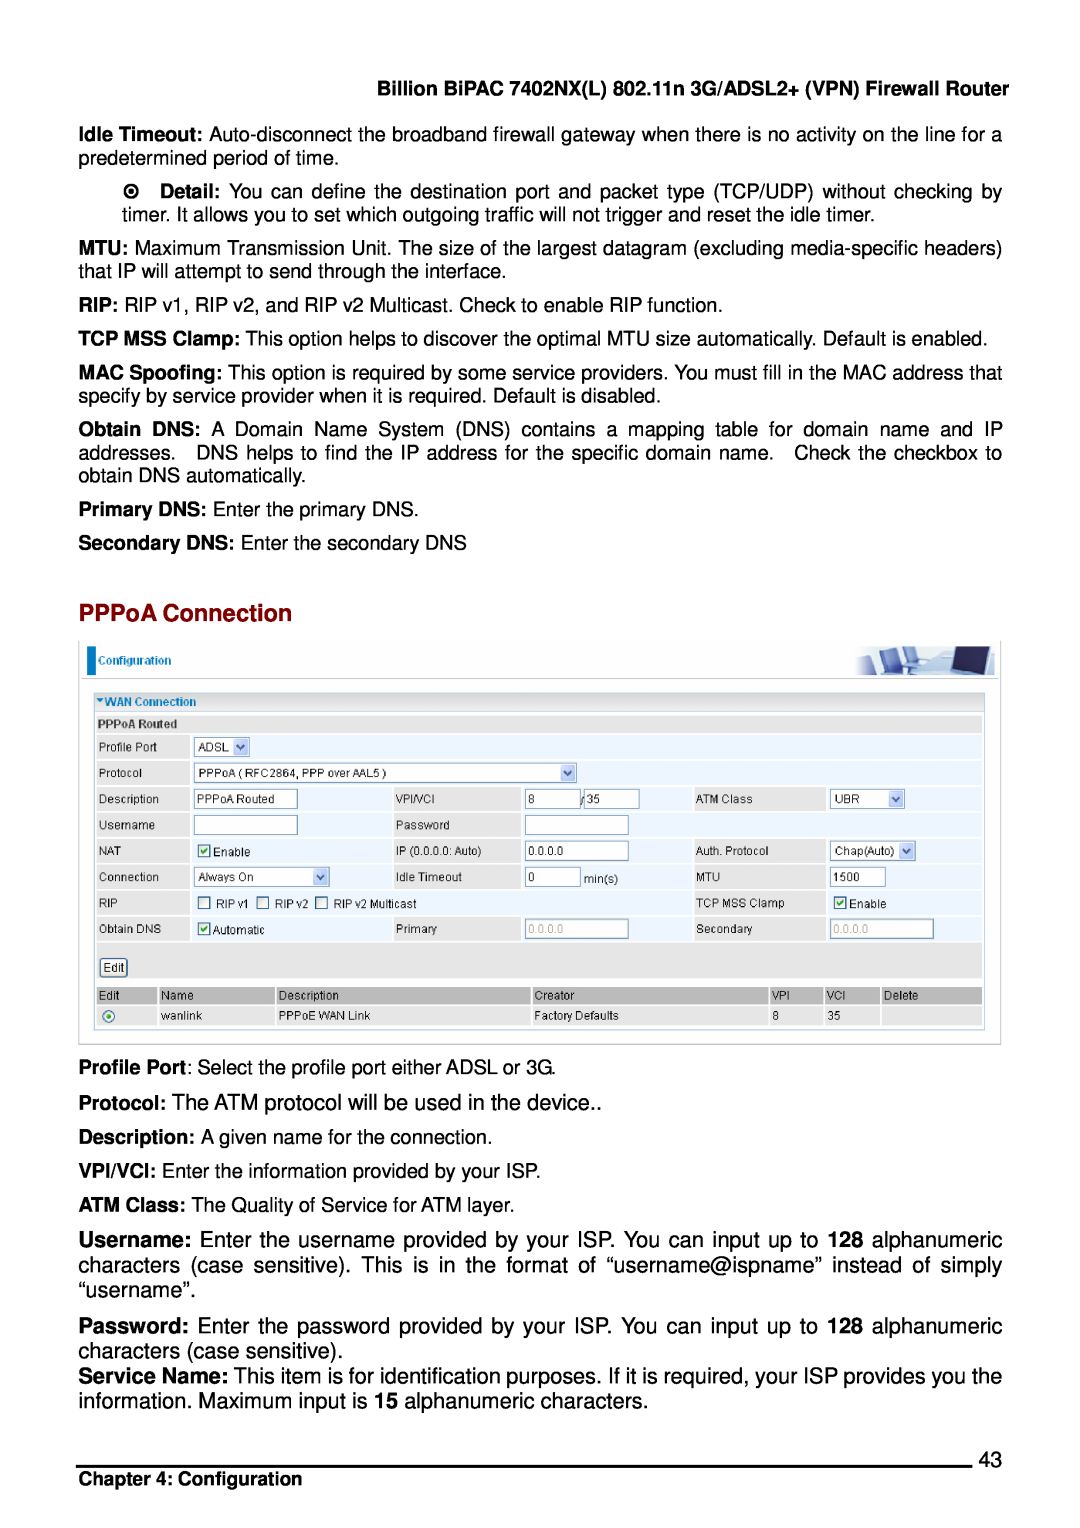 Billion Electric Company 7402NX user manual PPPoA Connection 